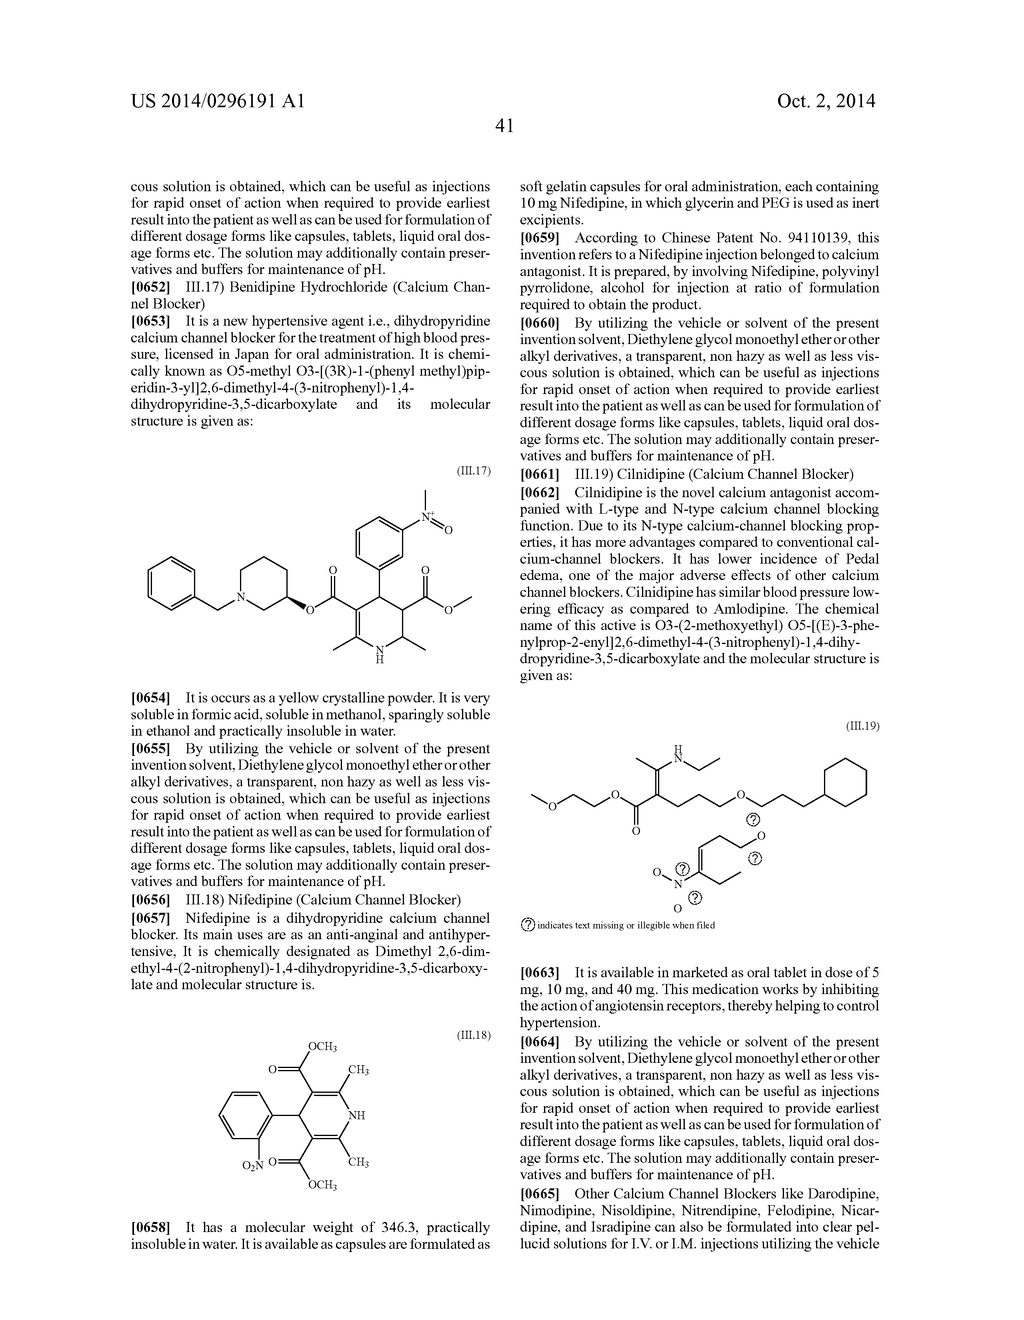 COMPOSITIONS OF PHARMACEUTICAL ACTIVES CONTAINING DIETHYLENE GLYCOL     MONOETHYL ETHER OR OTHER ALKYL DERIVATIVES - diagram, schematic, and image 43